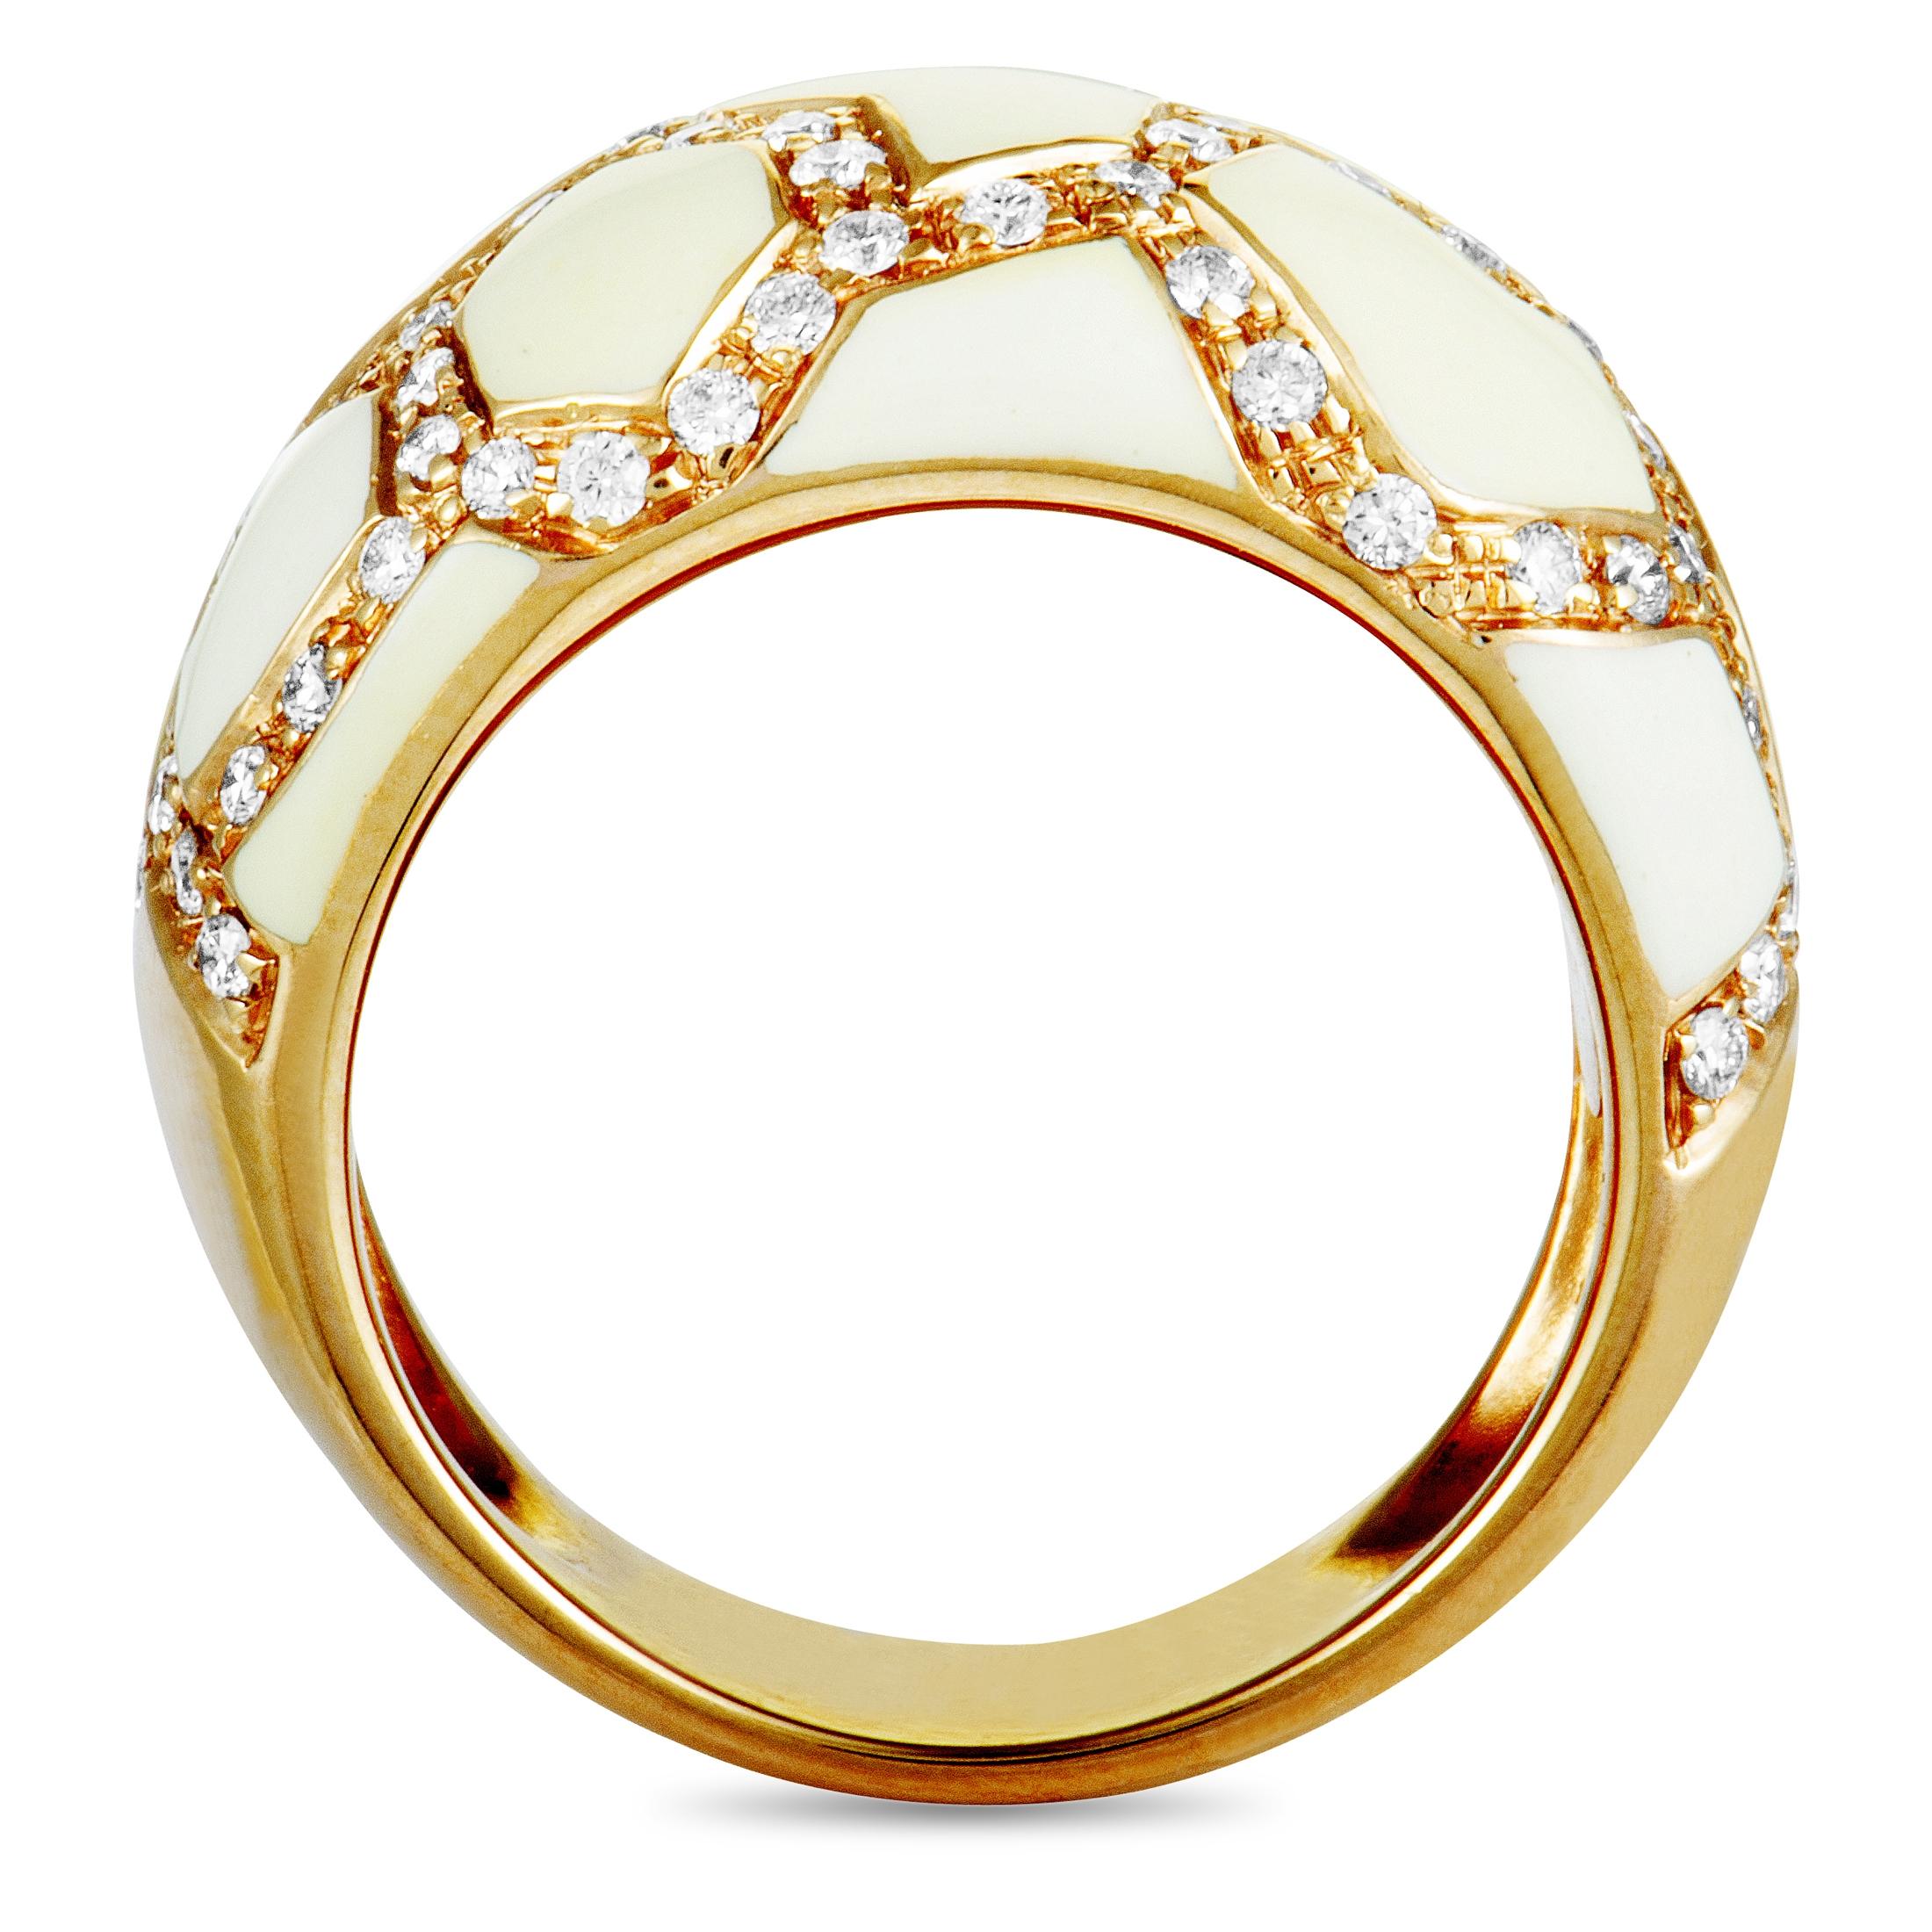 A piece of exceptional aesthetic and artistic value, this fashionable ring designed by Roberto Coin is beautifully made of alluring 18K rose gold that is attractively accentuated by sublime white enamel and scintillating diamonds that weigh 0.75